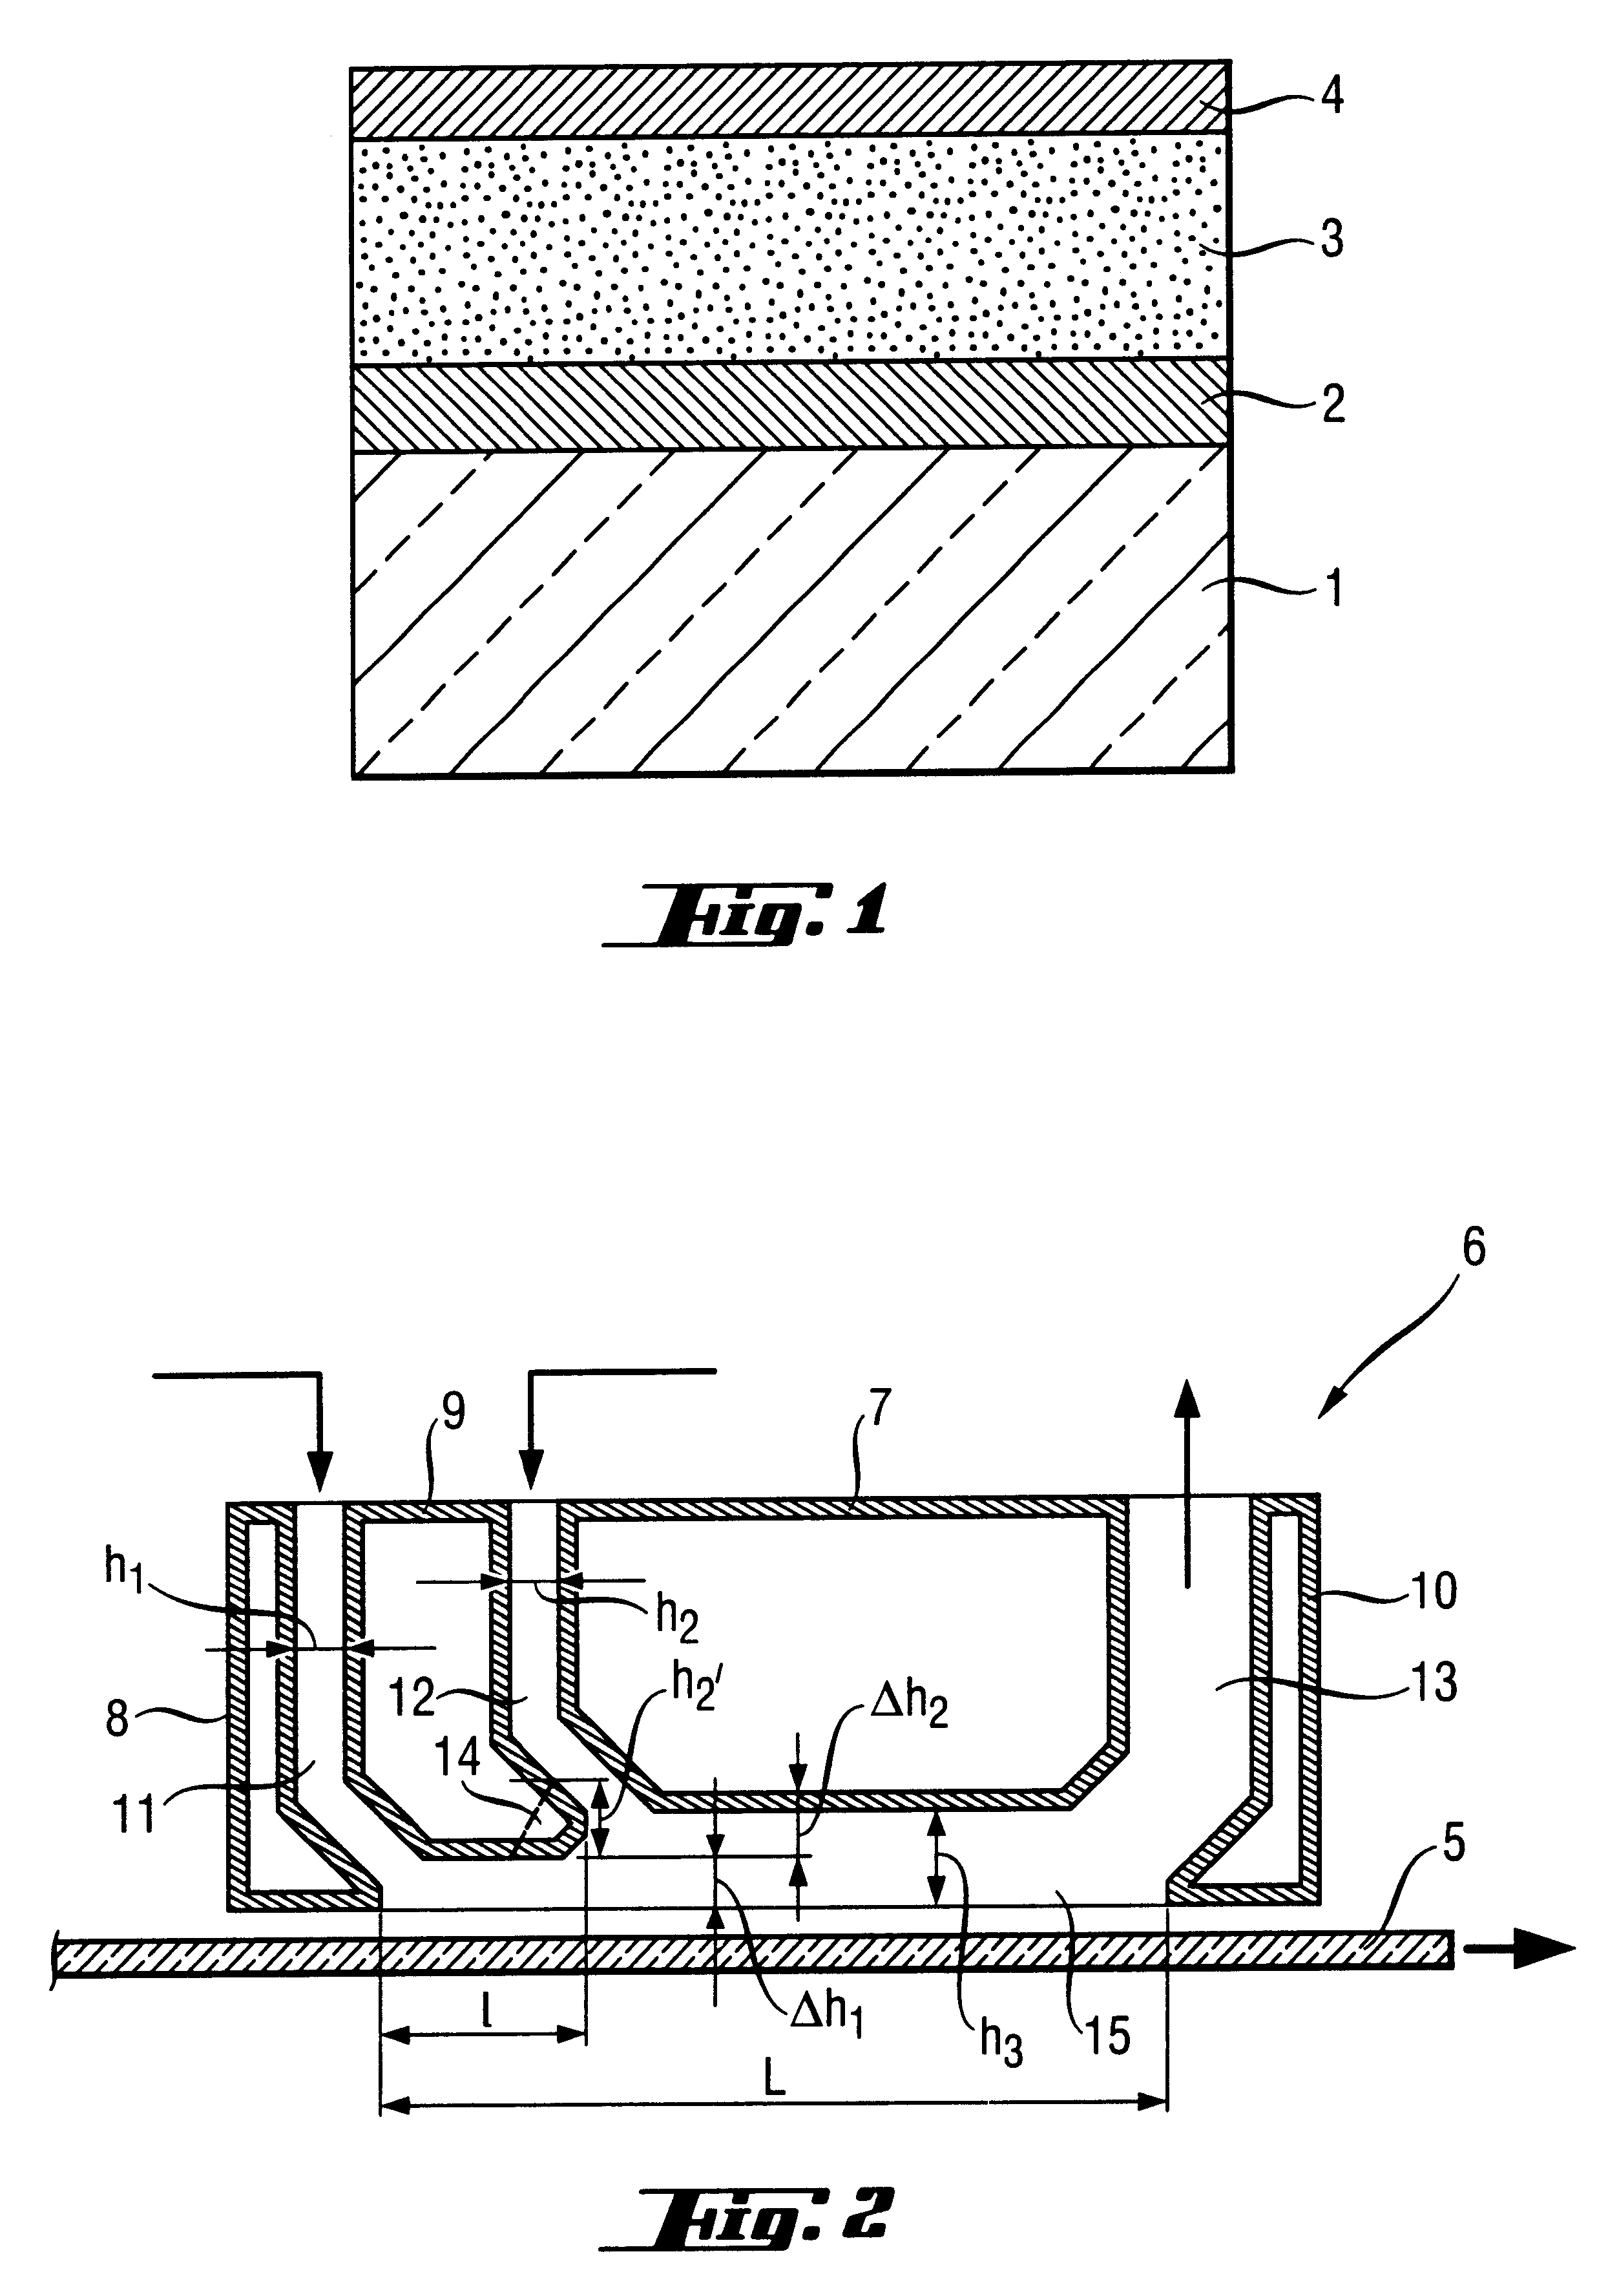 Process and apparatus for providing a film with a gradient